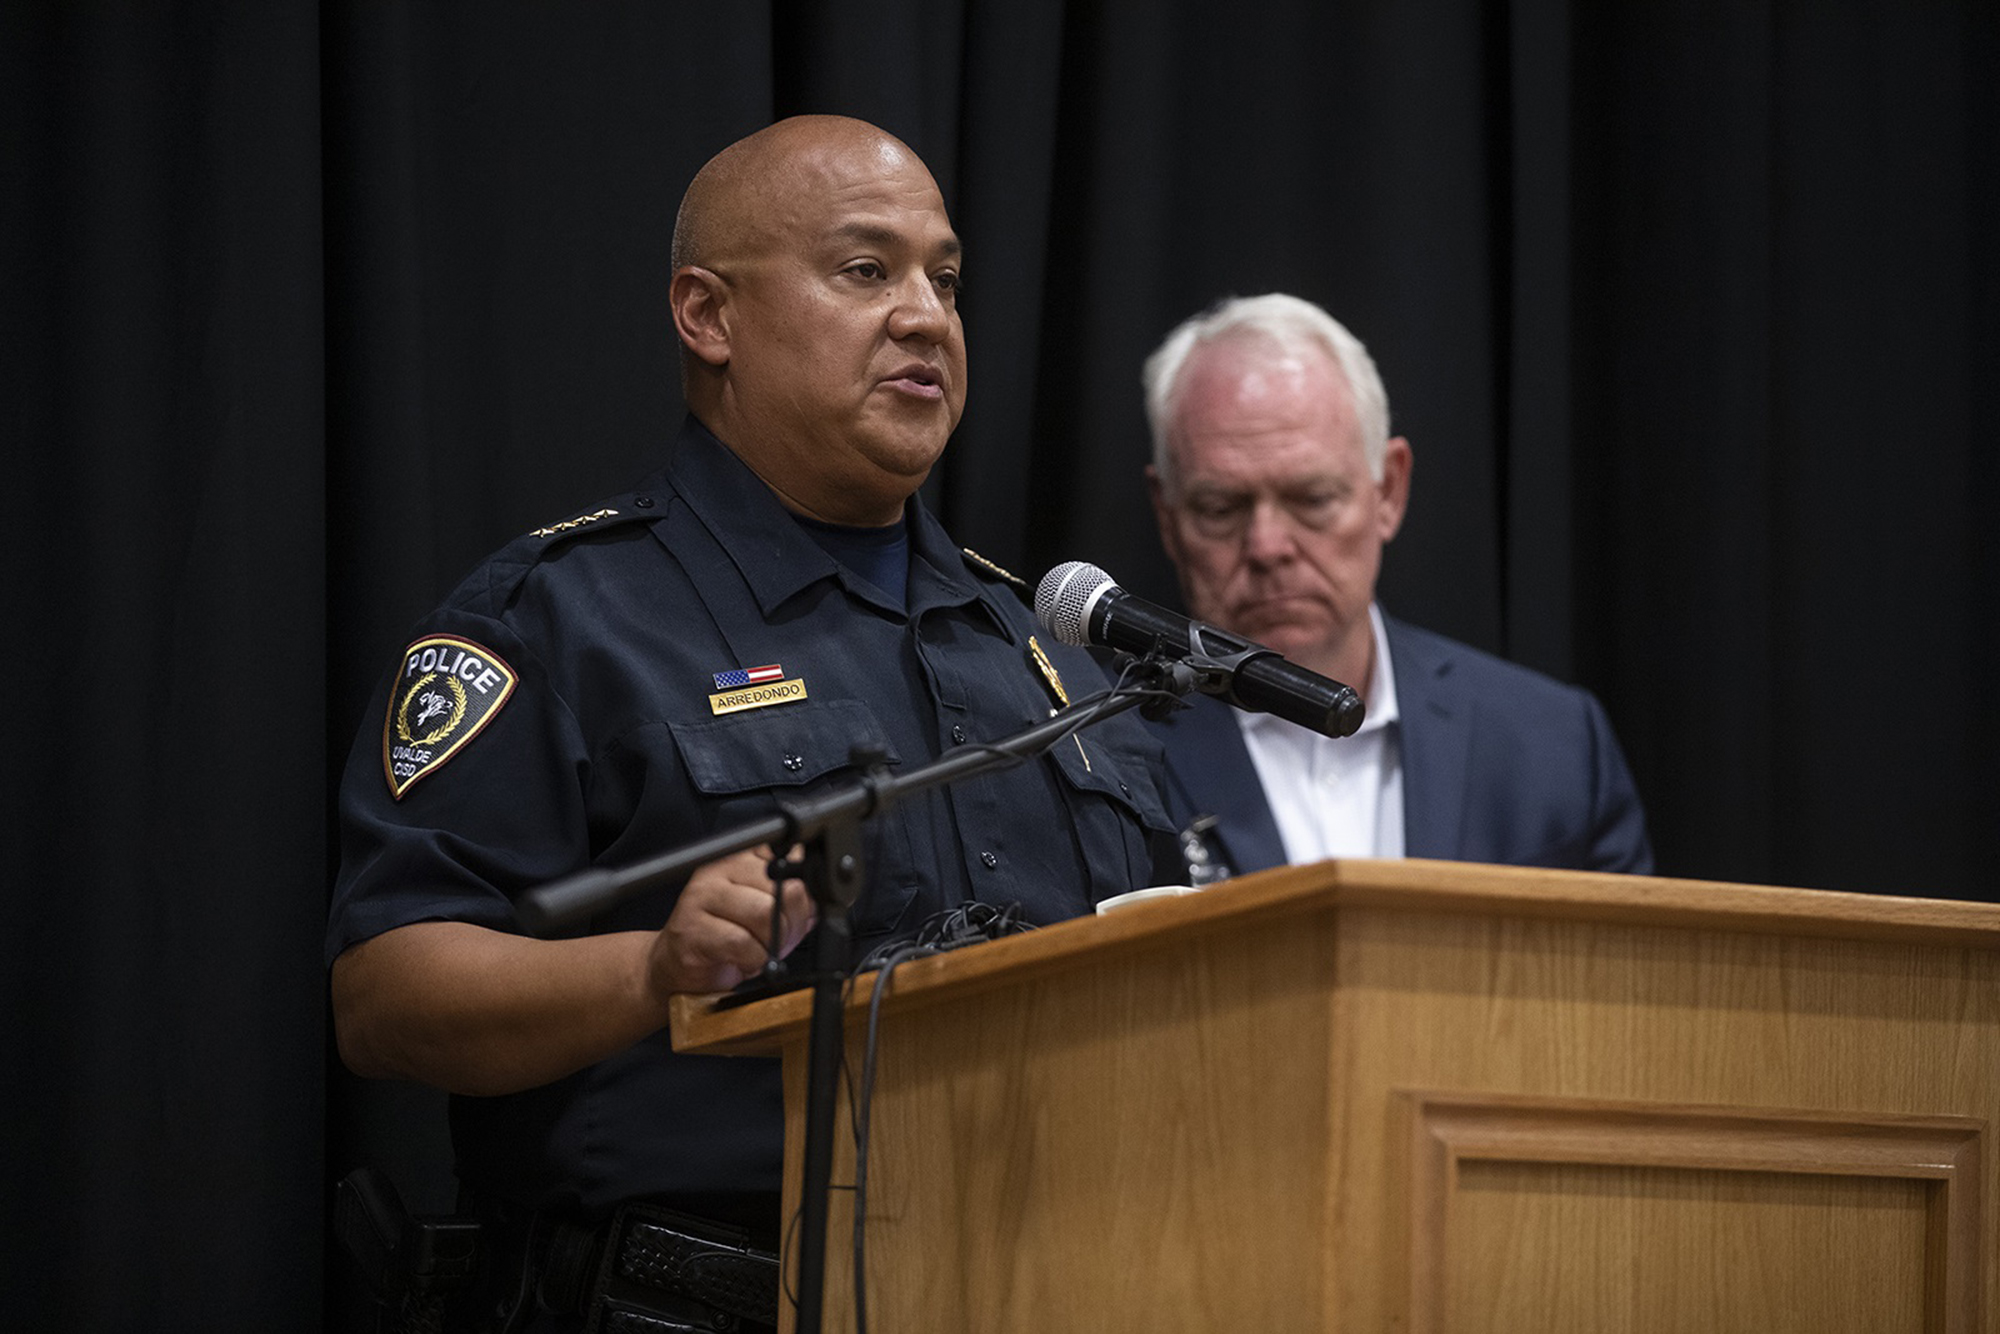 PHOTO: In this May 24, 2022, file photo, Uvalde police chief Pete Arredondo speaks at a press conference following the shooting at Robb Elementary School in Uvalde, Texas.